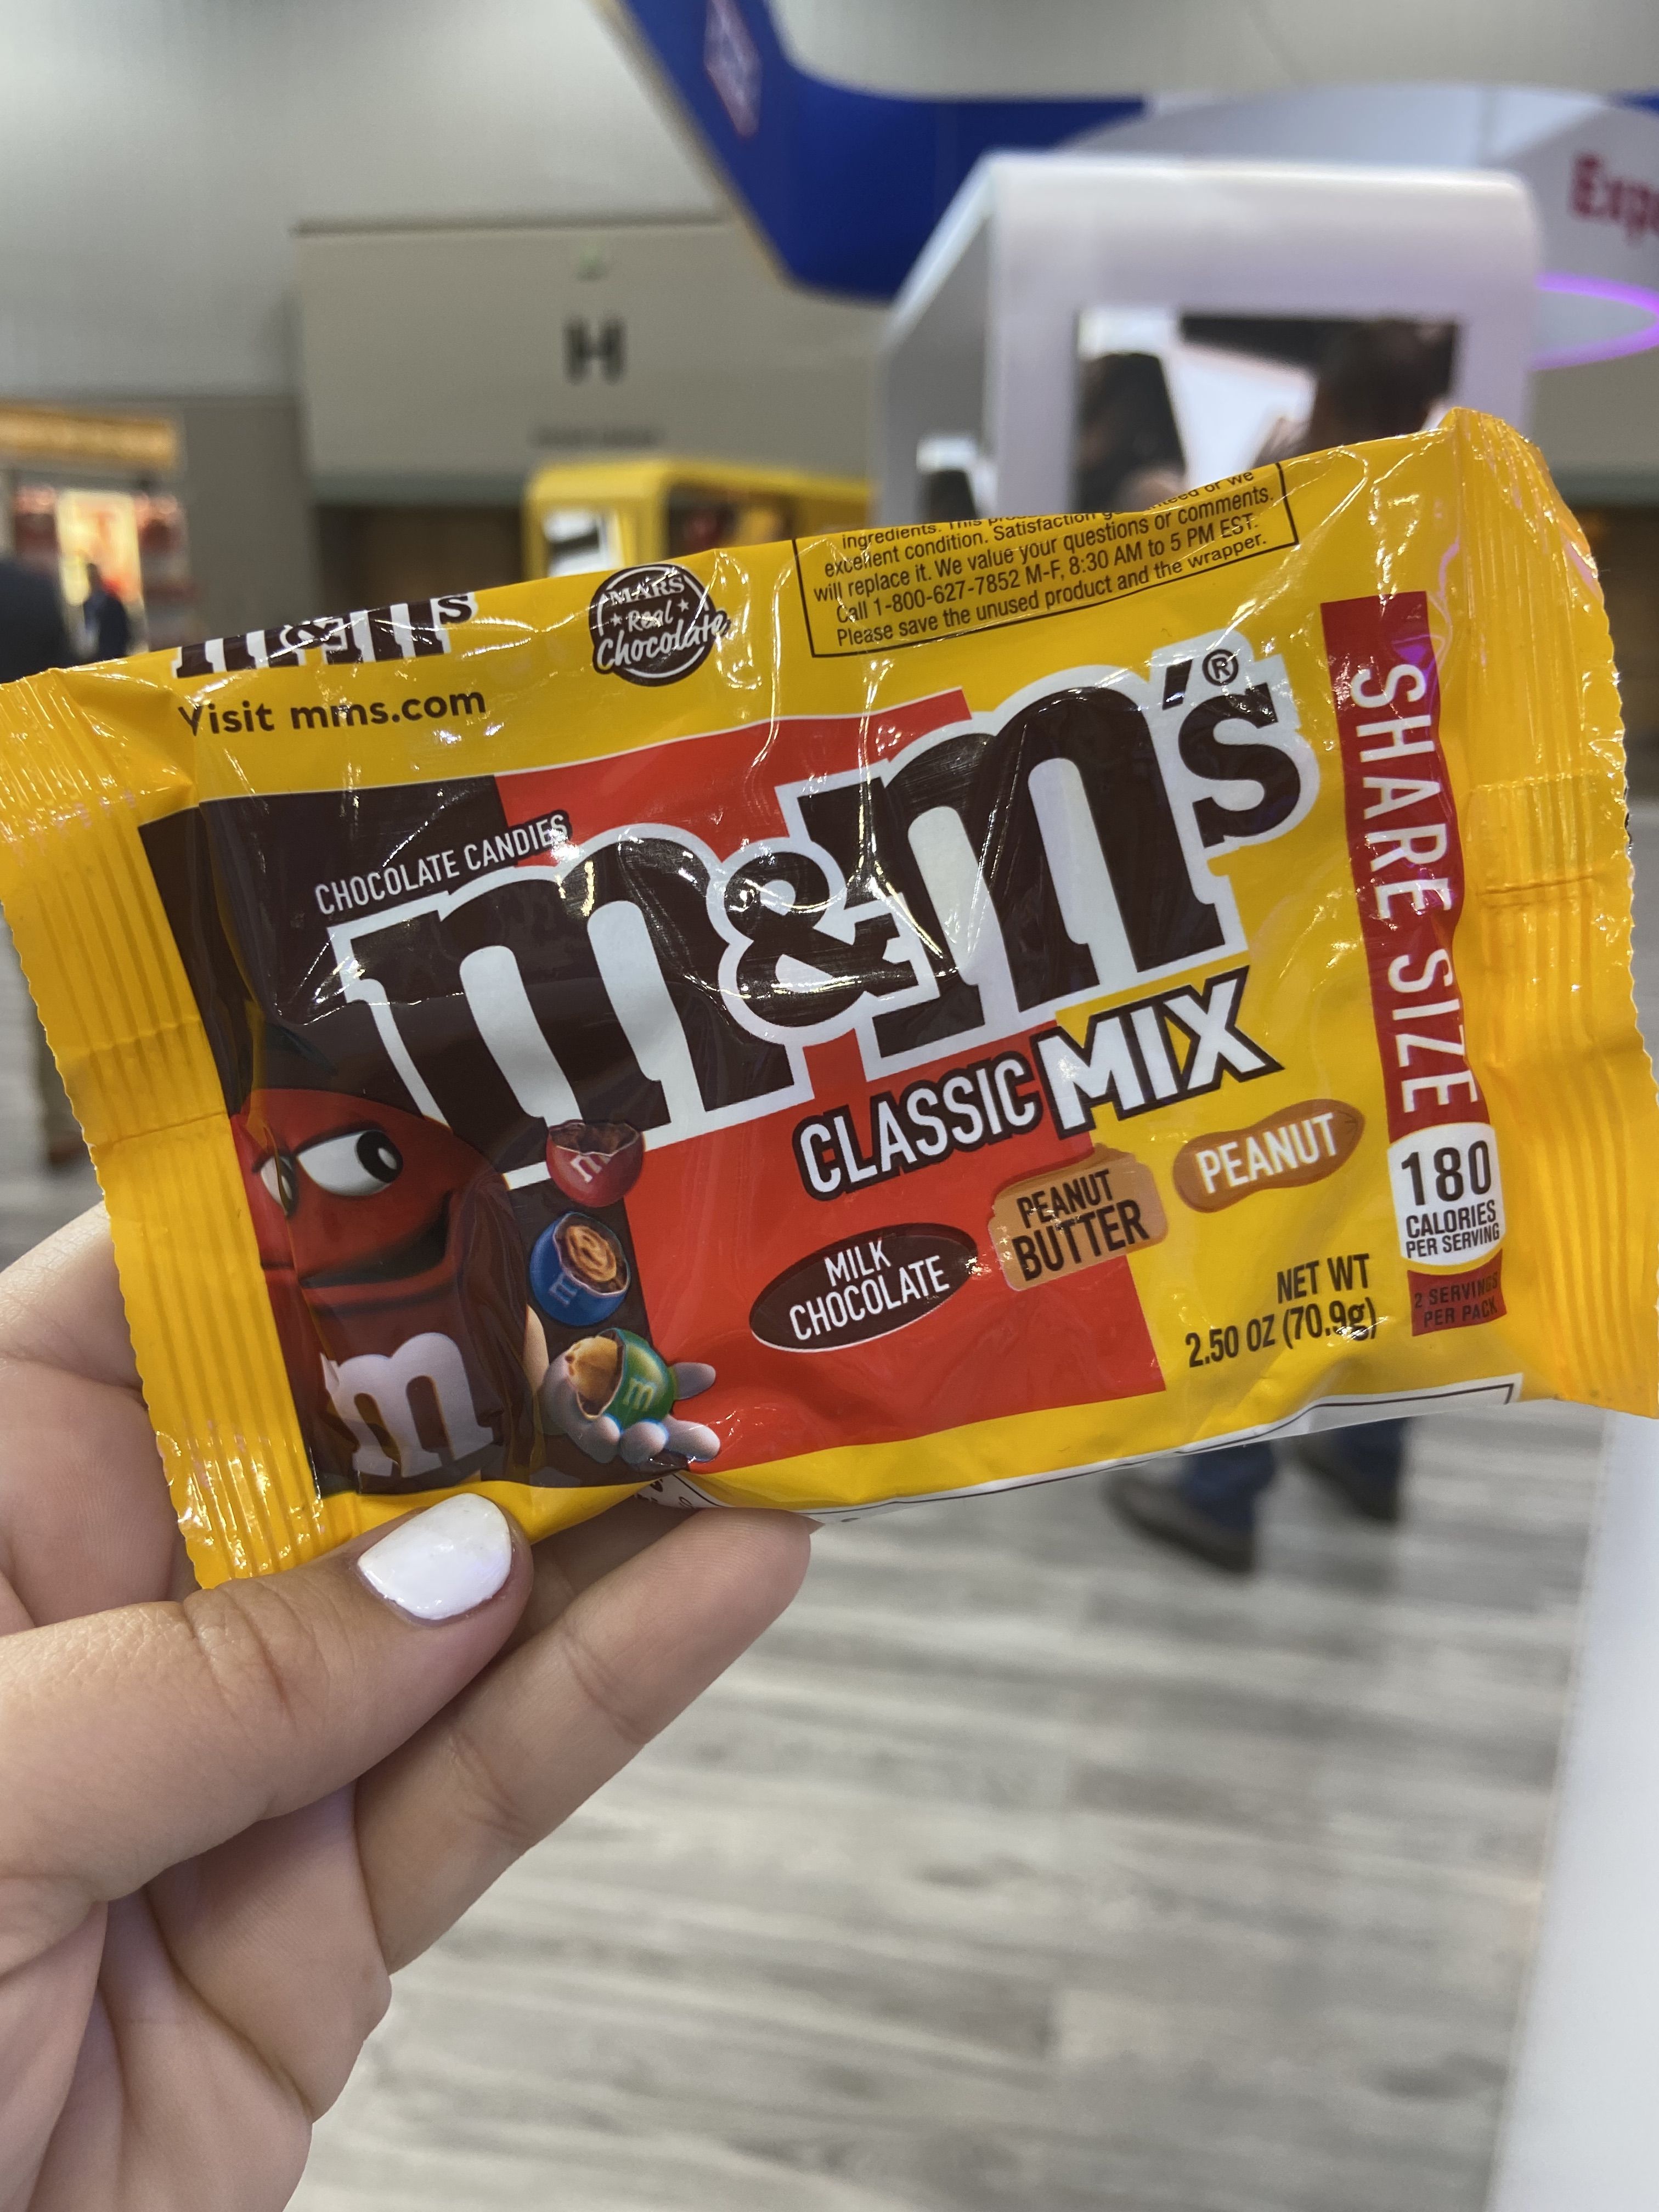 The 2021 Sweets & Snacks Expo's Top Snacks You'll Want Right Now